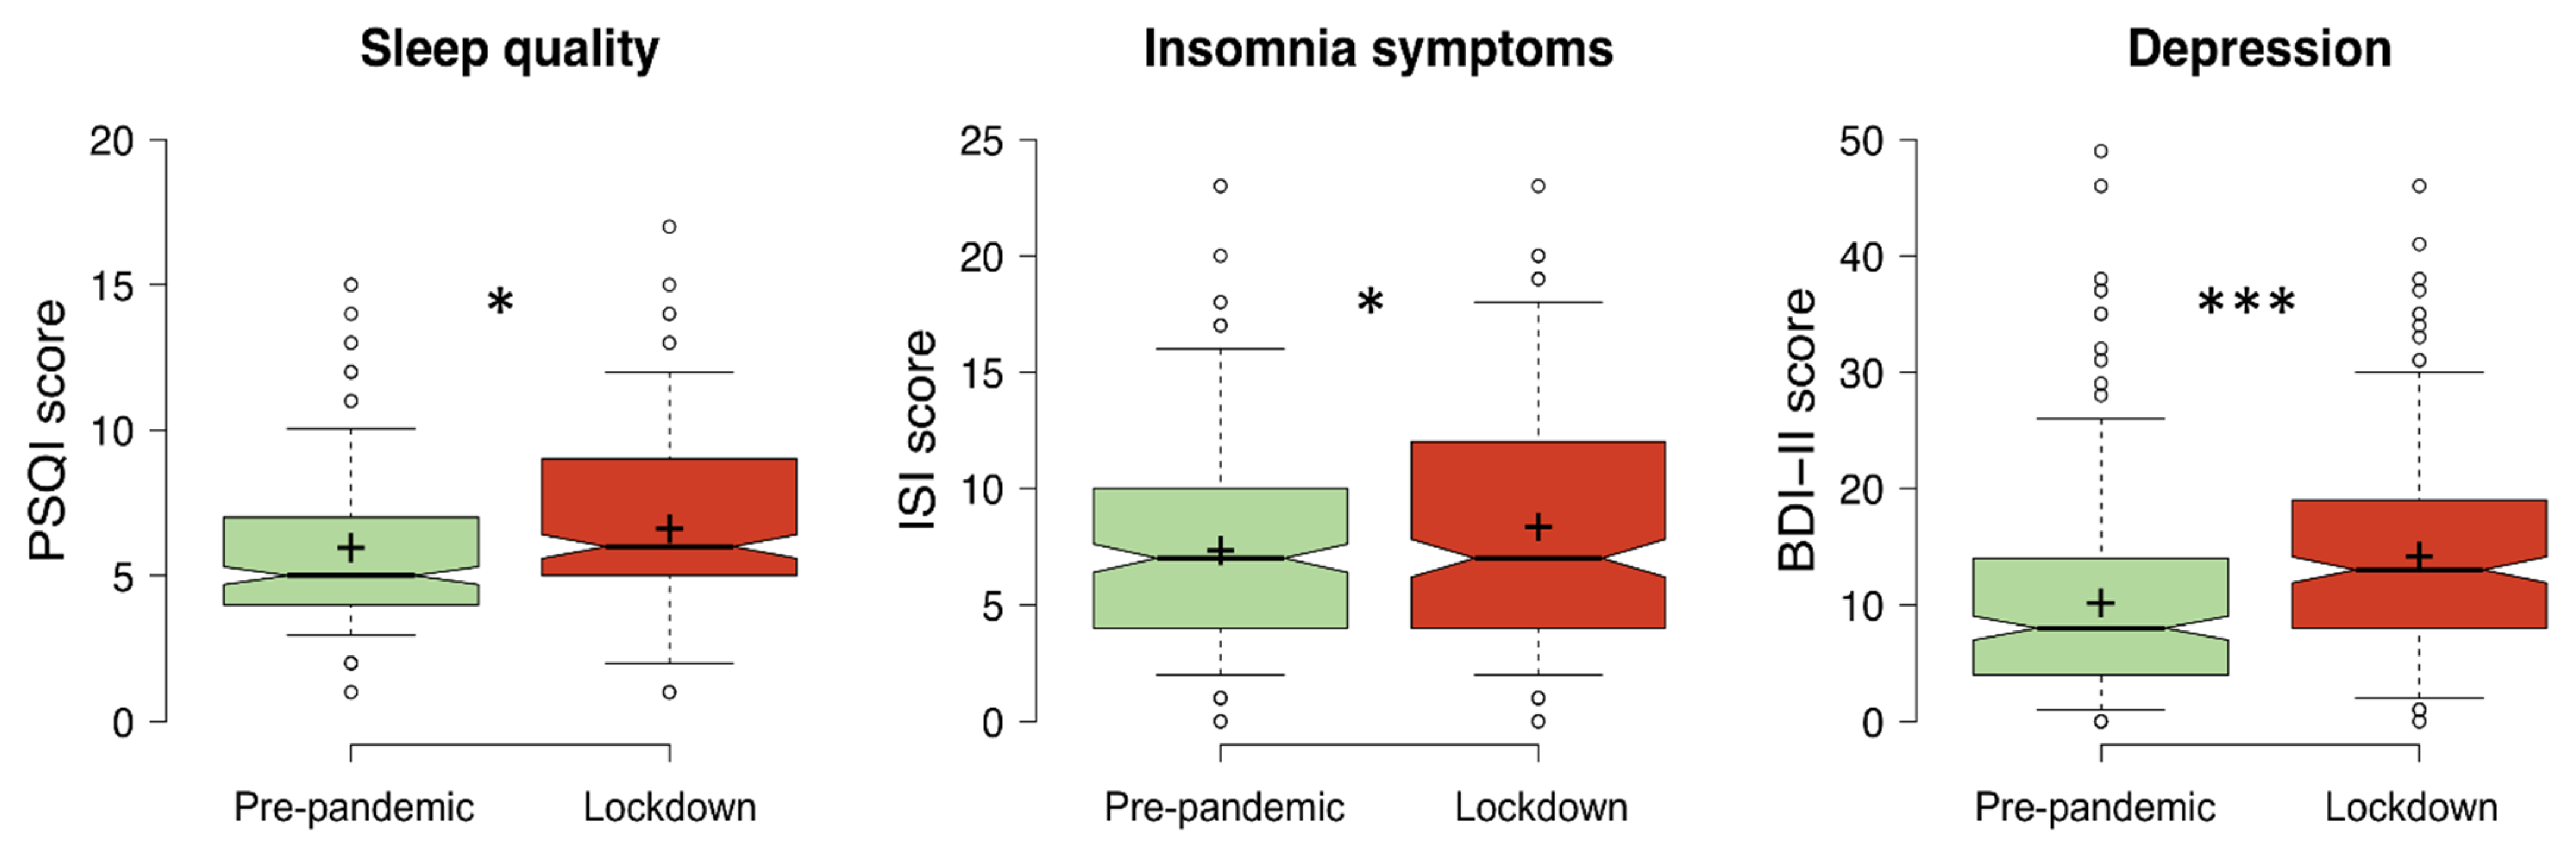 IJERPH | Free Full-Text | Sleep Quality, Insomnia Symptoms, and Depressive  Symptomatology among Italian University Students before and during the  Covid-19 Lockdown | HTML